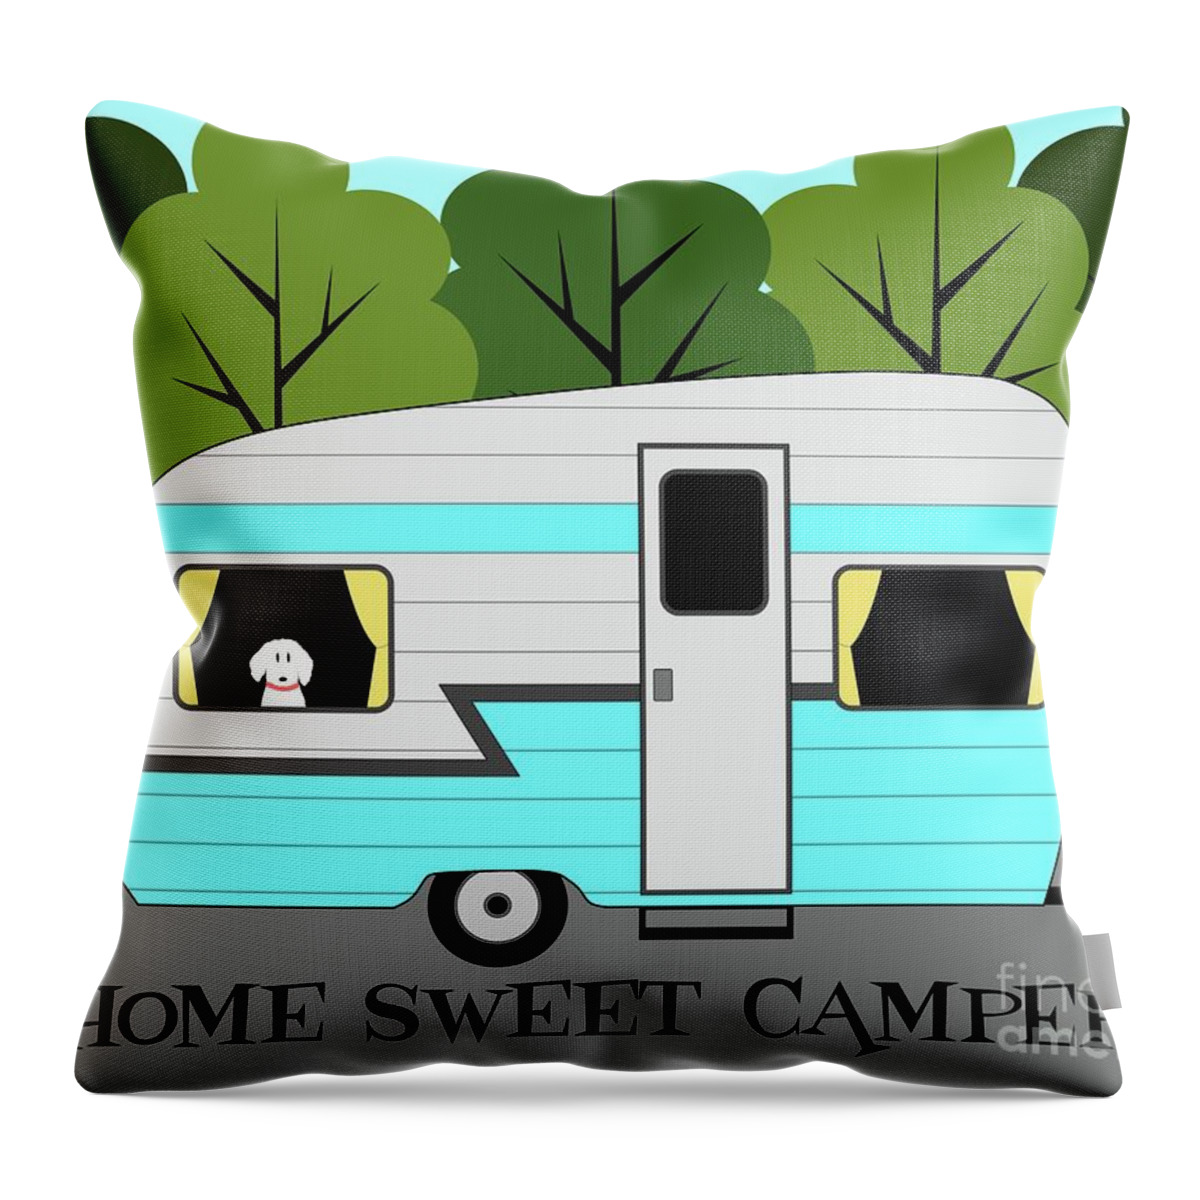 Vintage Camper Throw Pillow featuring the digital art Home Sweet Camper with Dog by Donna Mibus